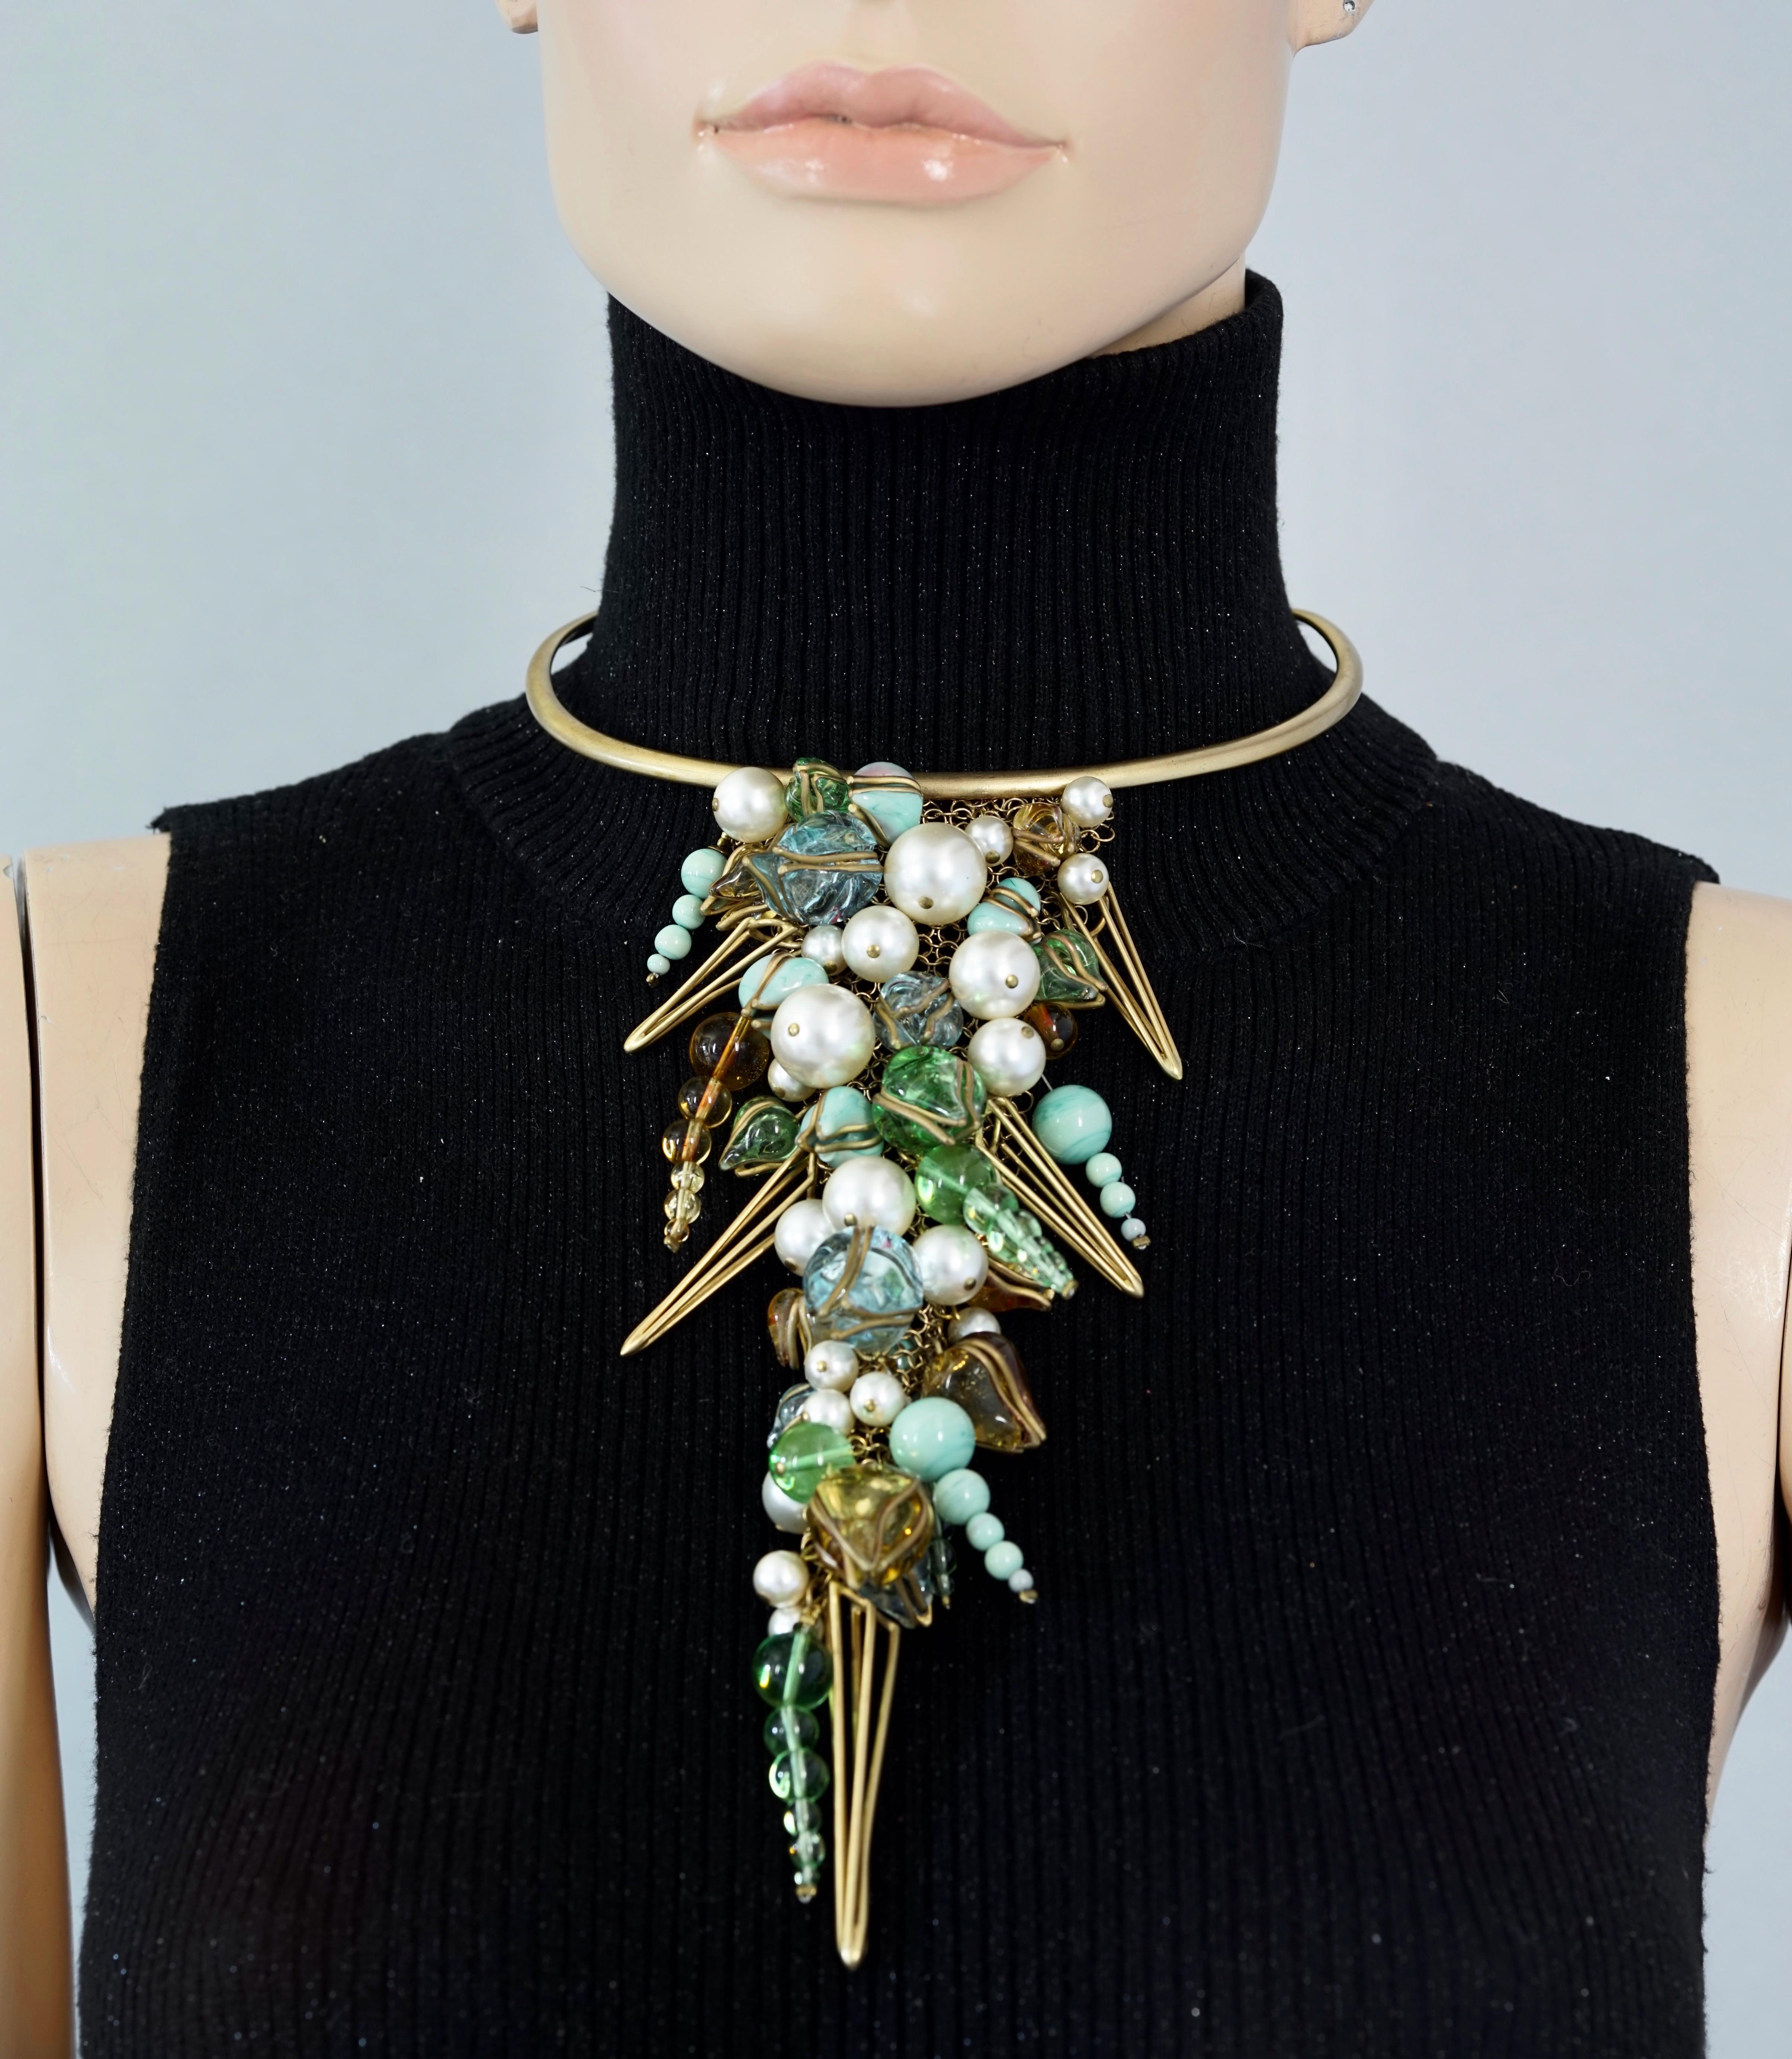 Vintage GRIPOIX Cascading Tulip Cluster Glass Pearls Beads Choker Necklace

Measurements:
Drop Height: 7.48 inches (19 cm)
Width: 4.33 inches (11 cm)
Wearable Length: 14.96 inches (38 cm) opening included

Features:
- Massive Gripoix/ glass paste